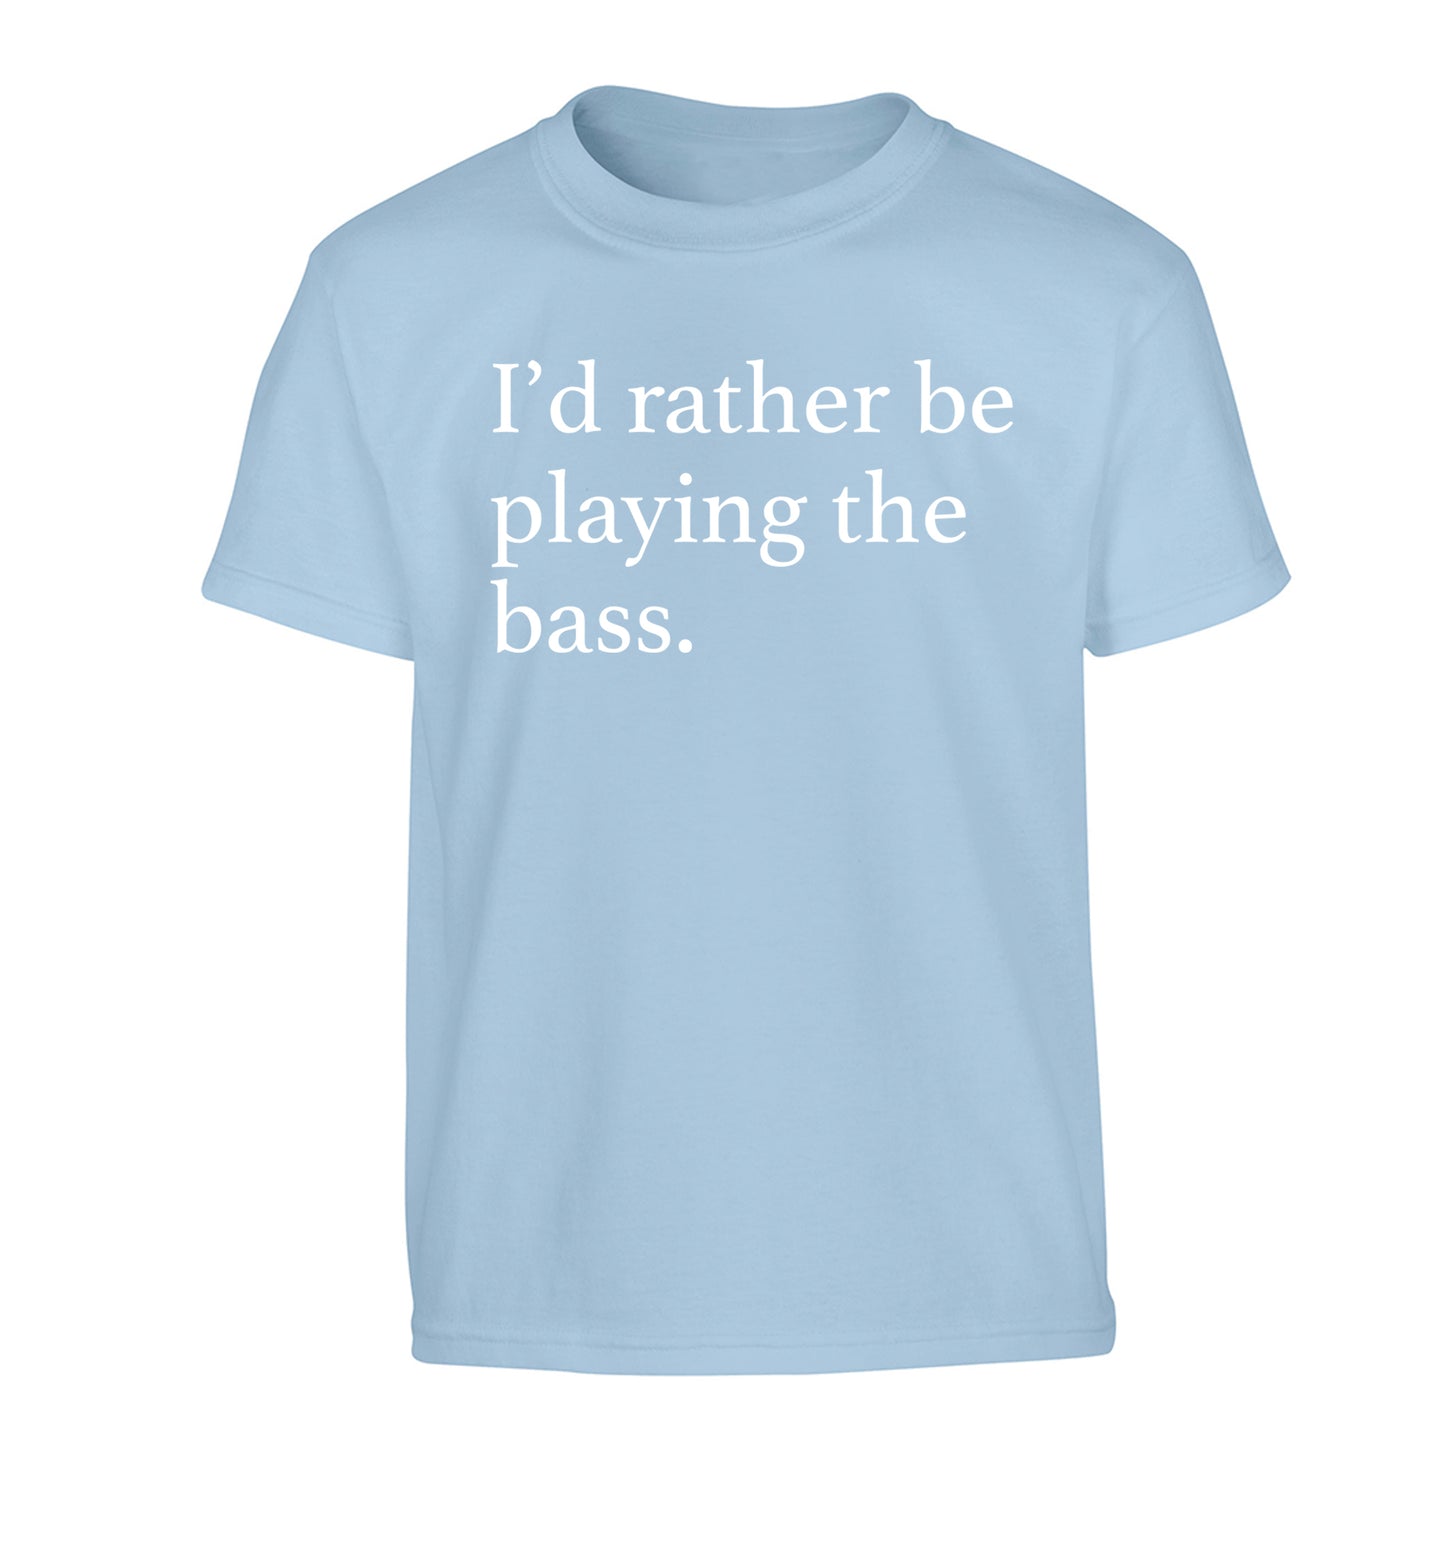 I'd rather by playing the bass Children's light blue Tshirt 12-14 Years